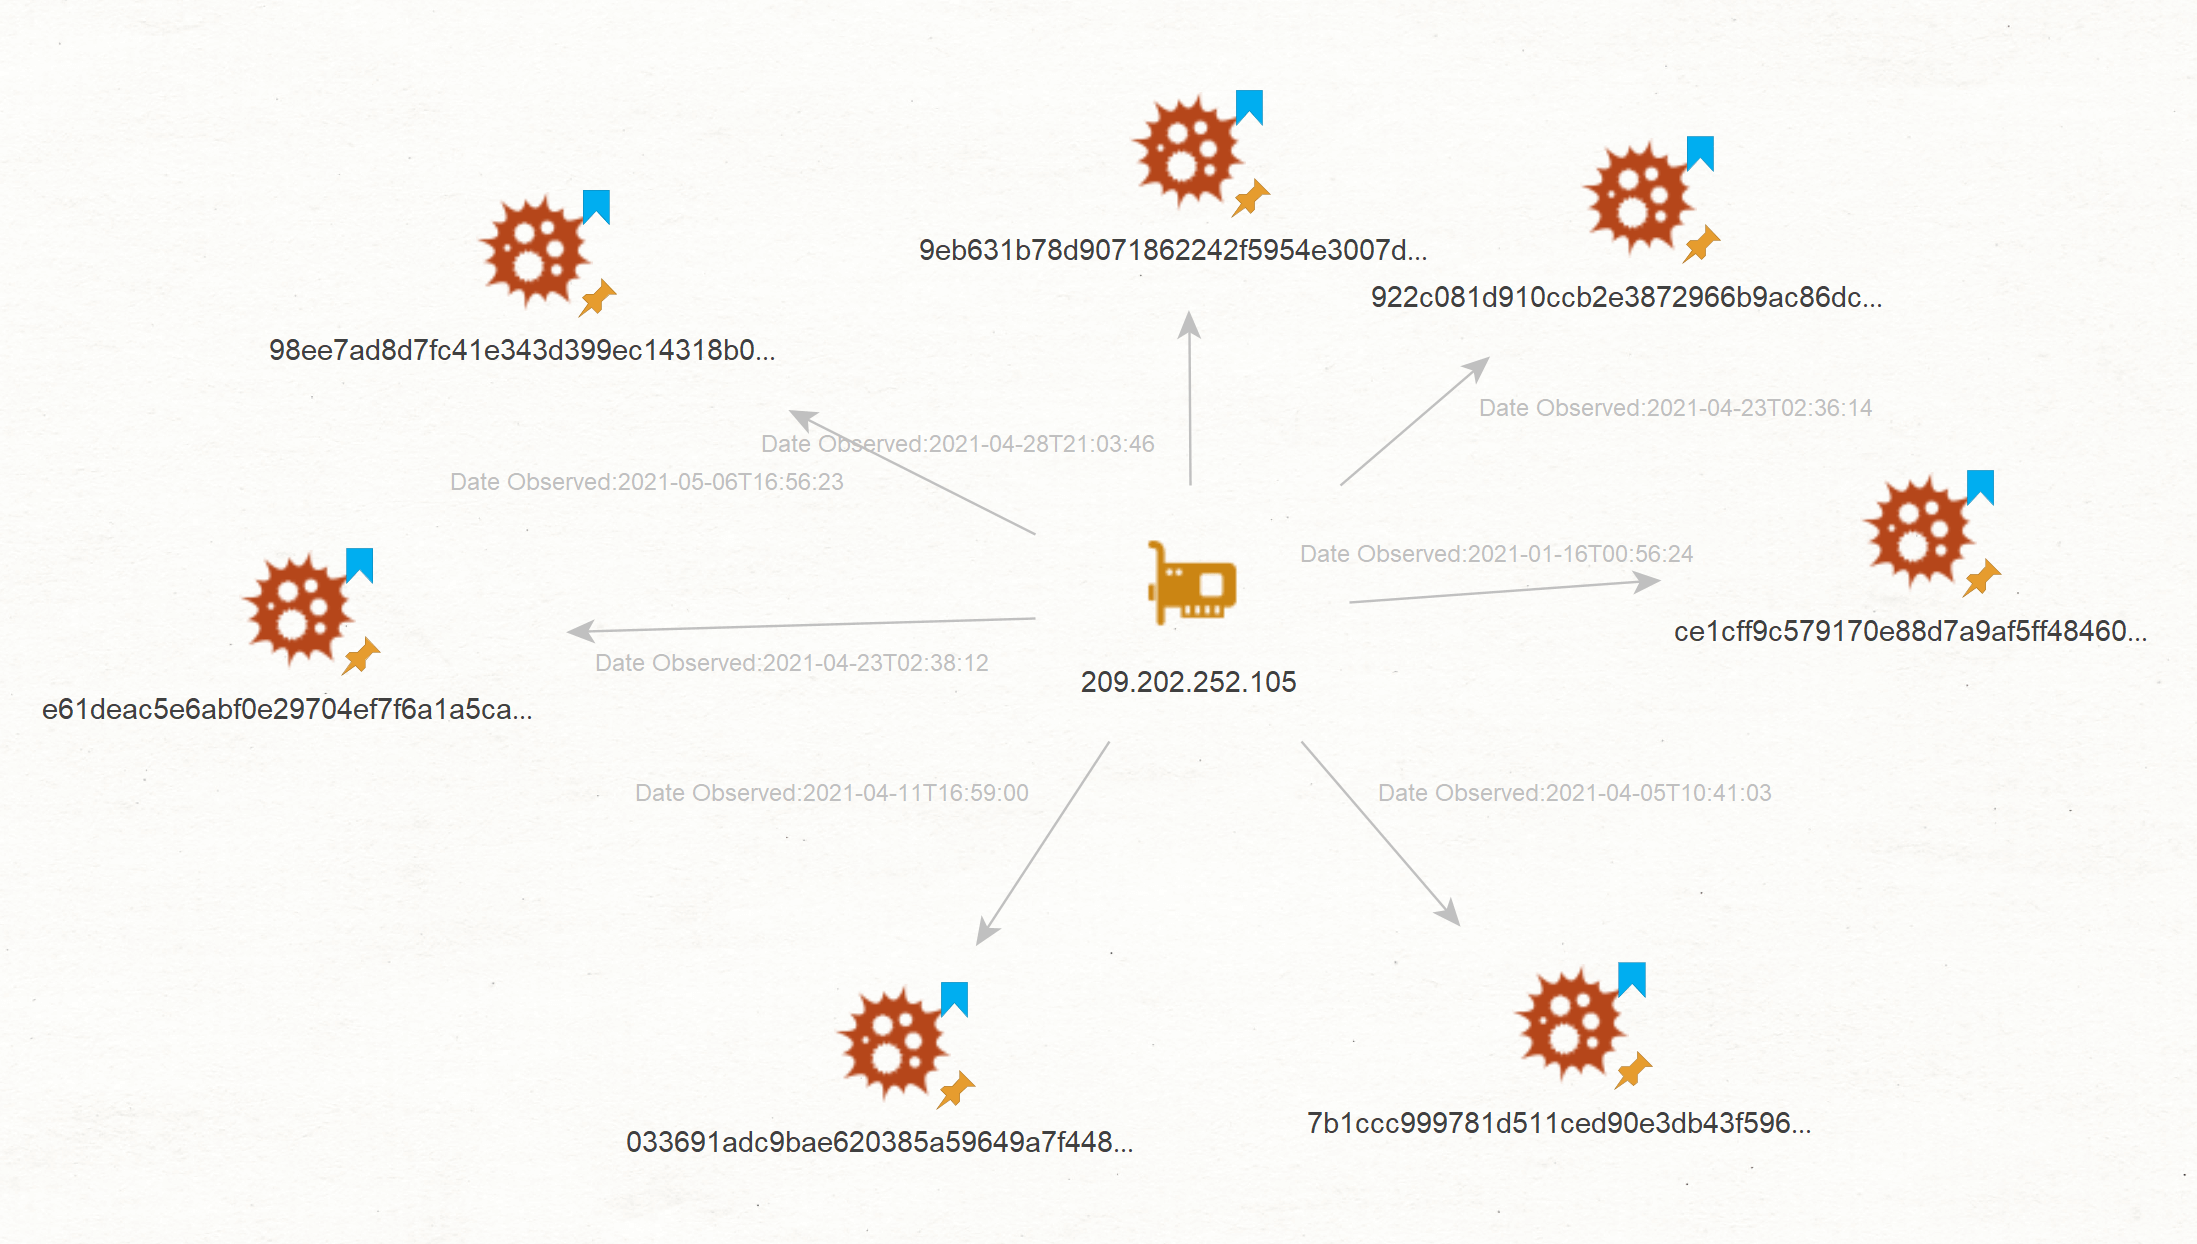 Malware hashes linking to an IP address